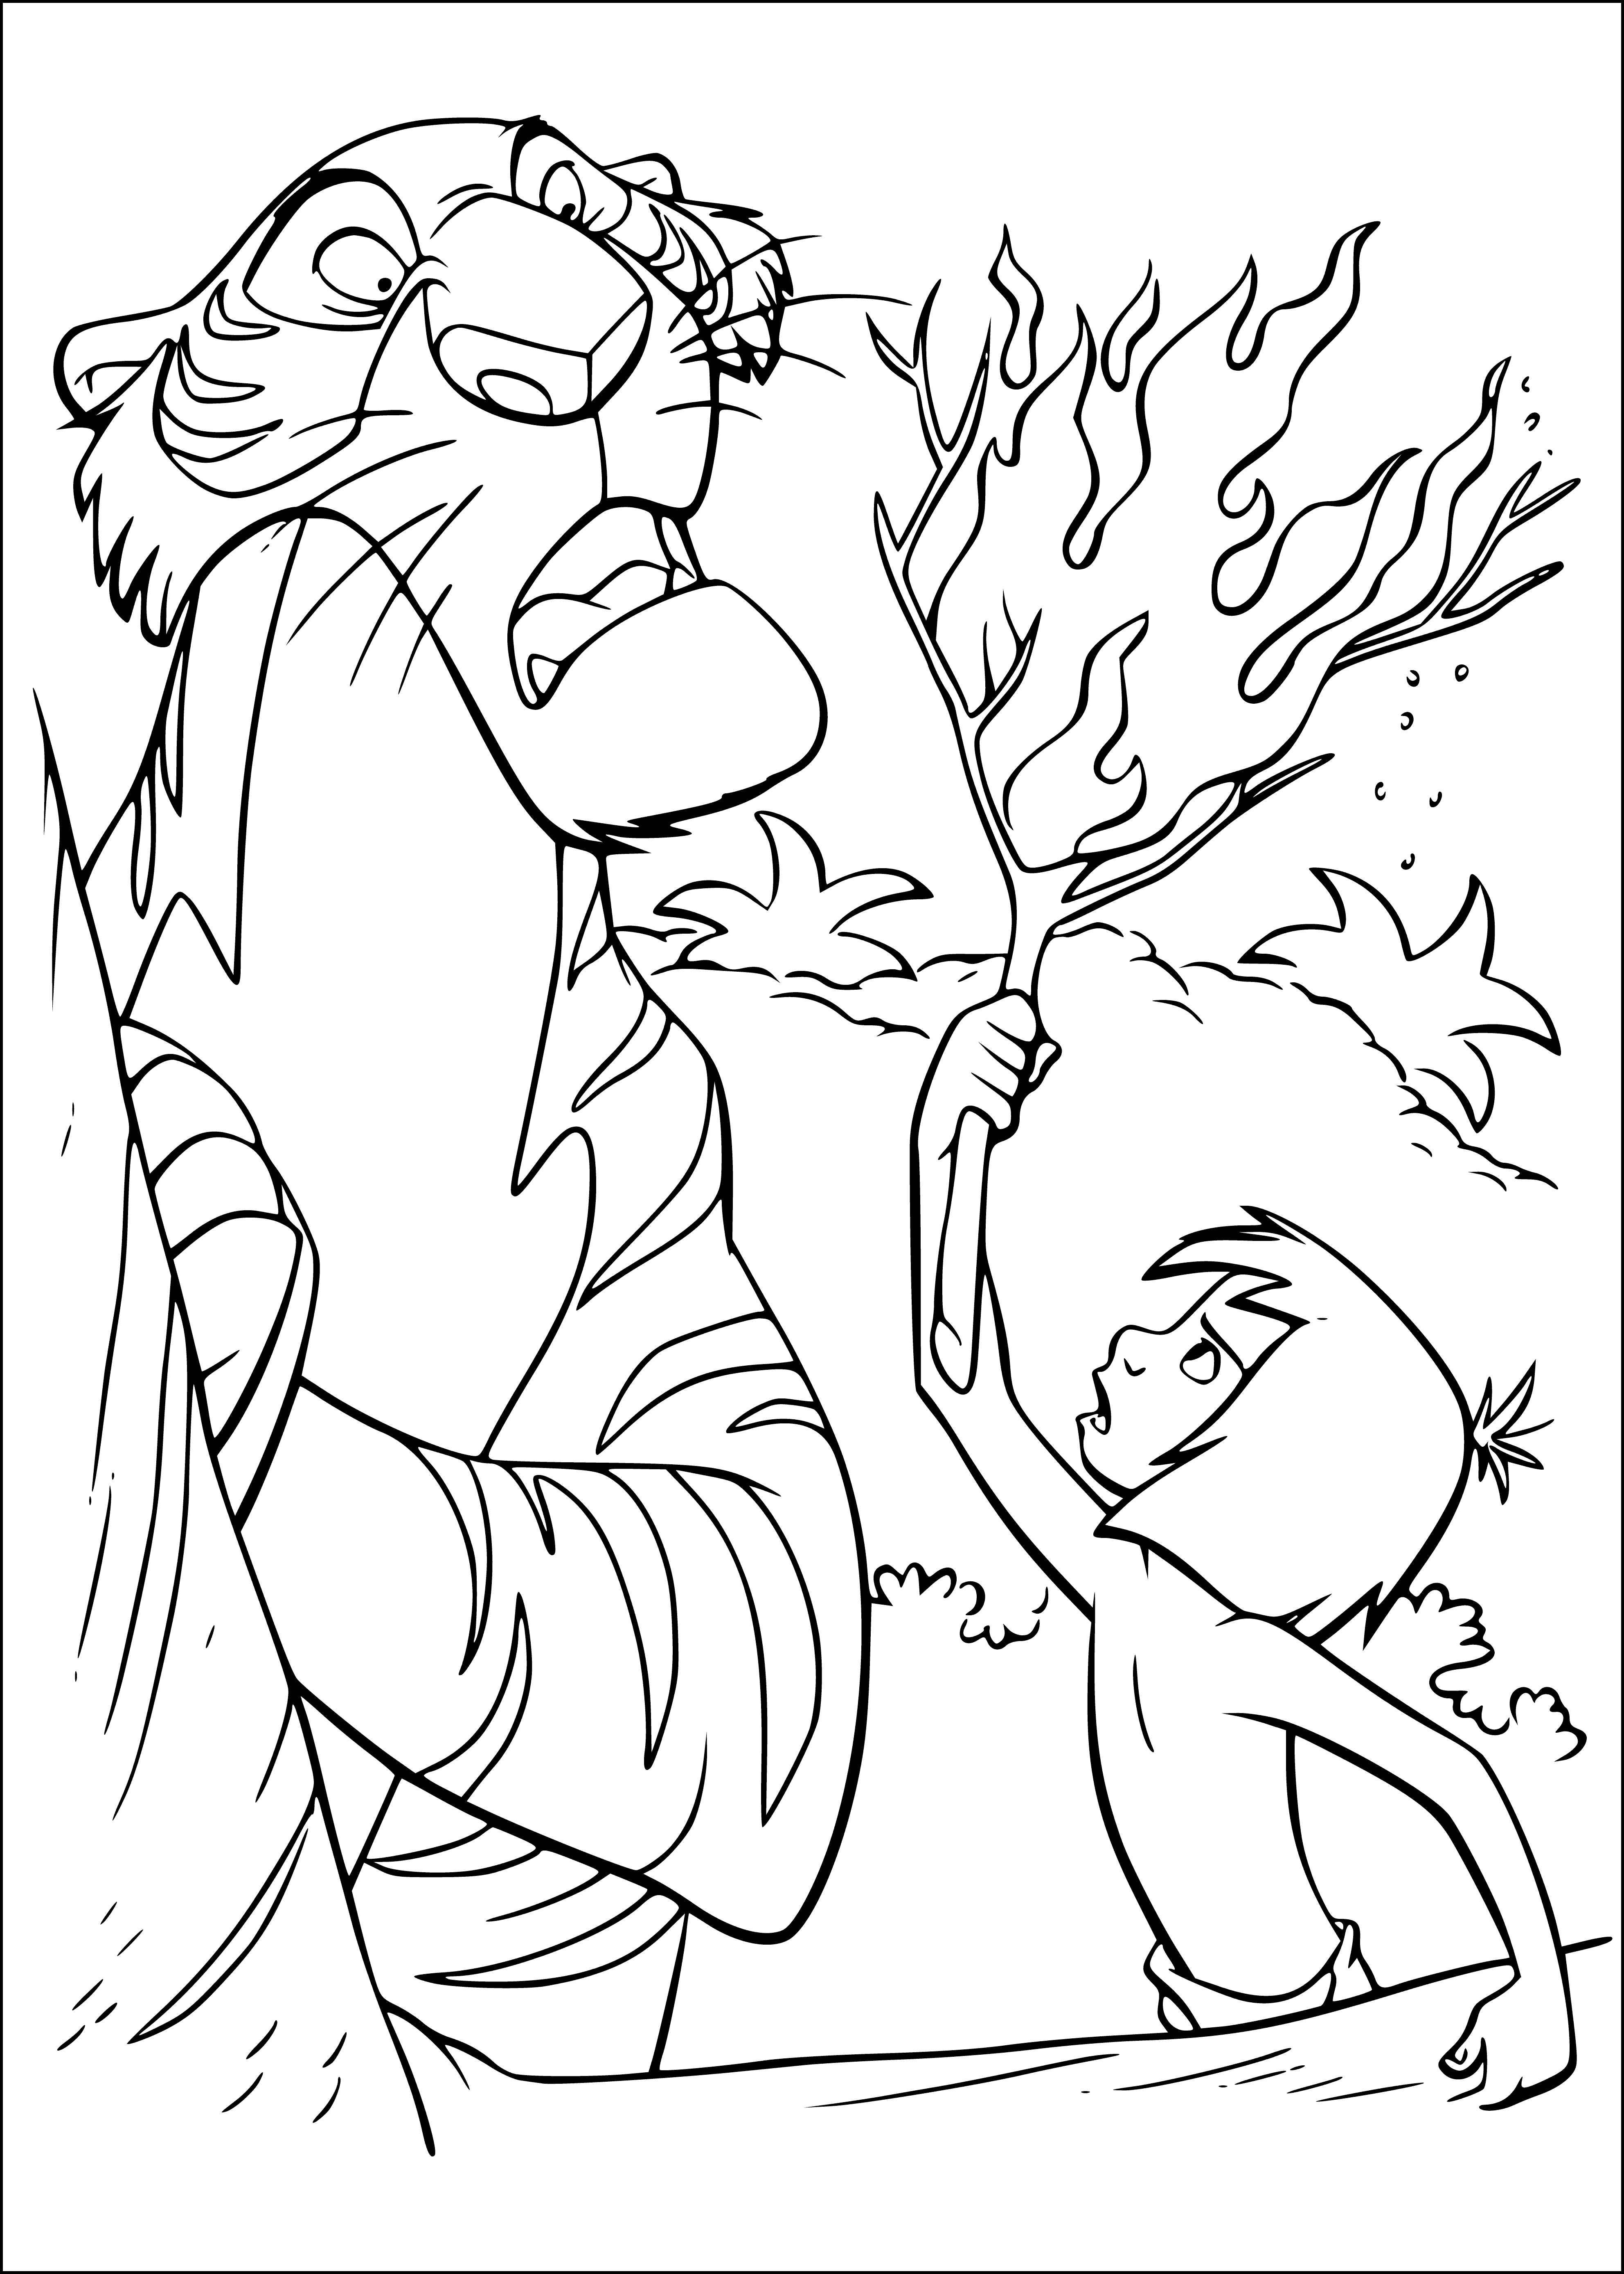 coloring page: Boy stands in front of a fire & holds a stick, looking at the flames. #coloringpage